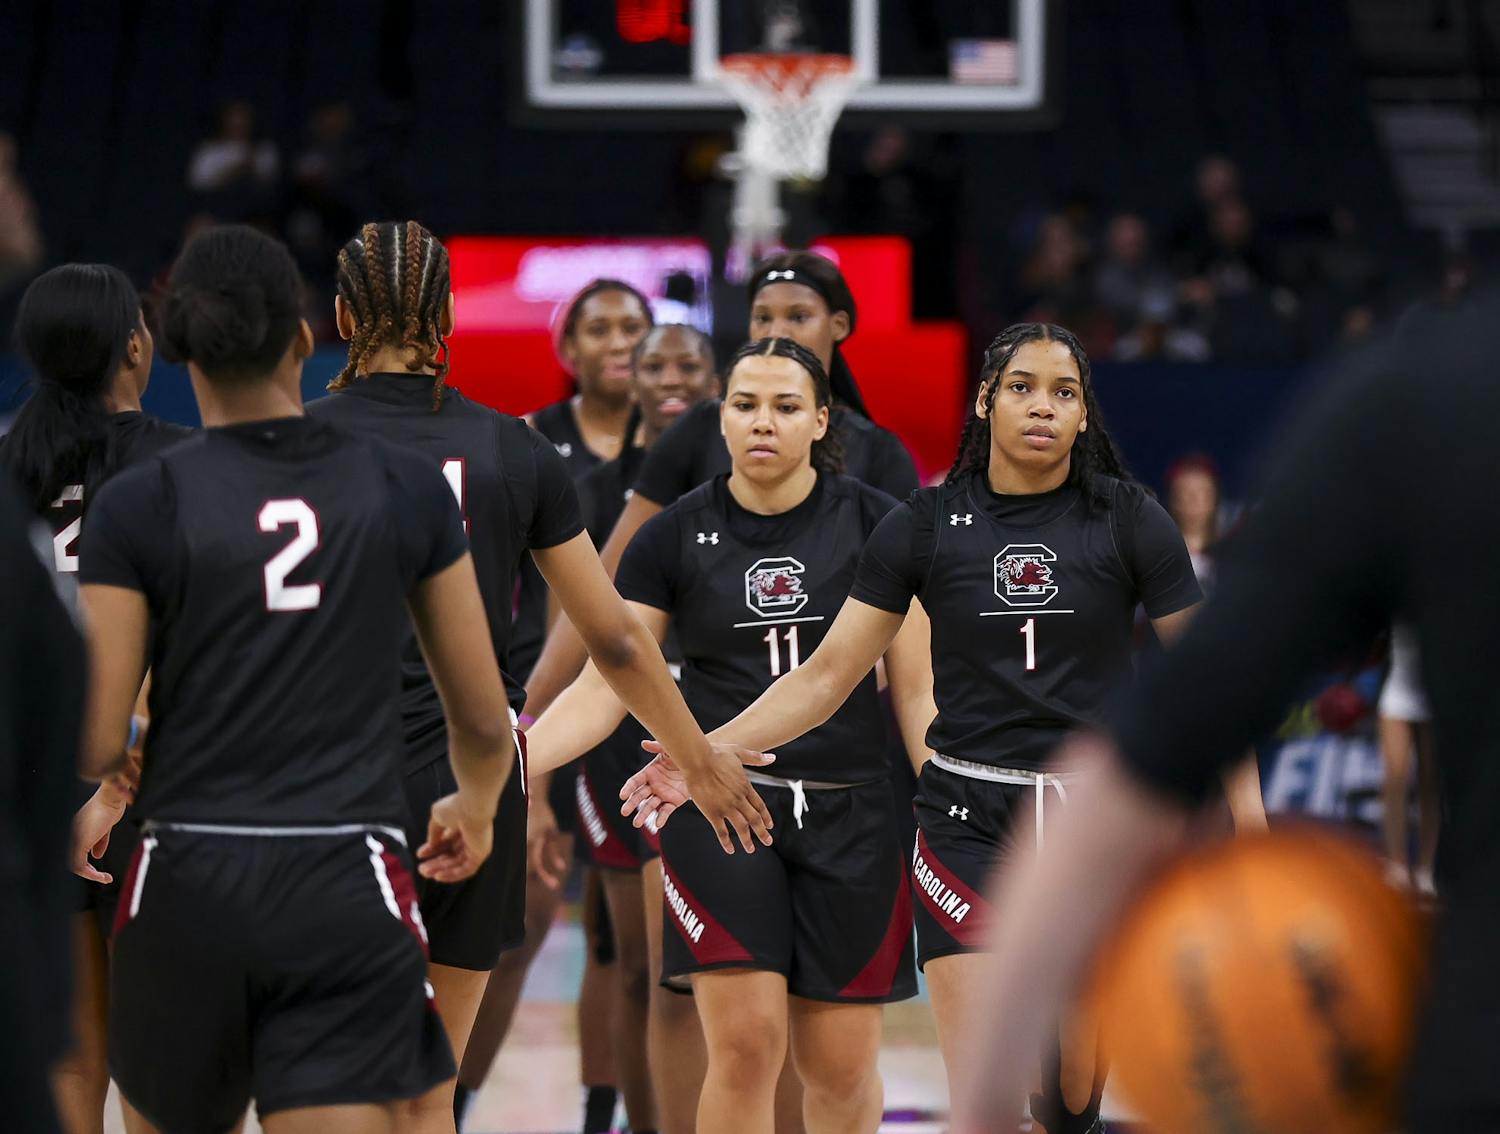 South Carolina womens basketball team practices shooting during open practice in the Target Center on April 2, 2022.